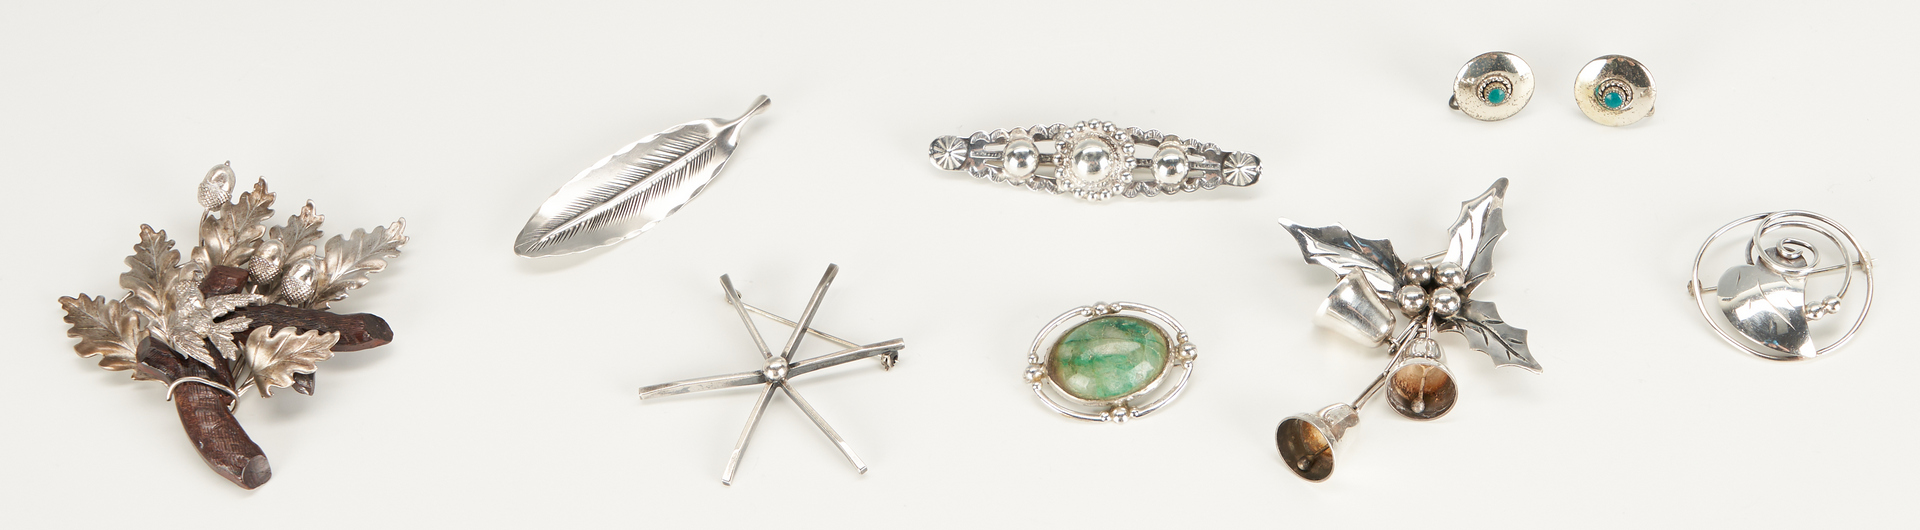 Lot 1240: 30 Sterling Silver Items, incl. Danish Art Nouveau, Brooches, Enameled